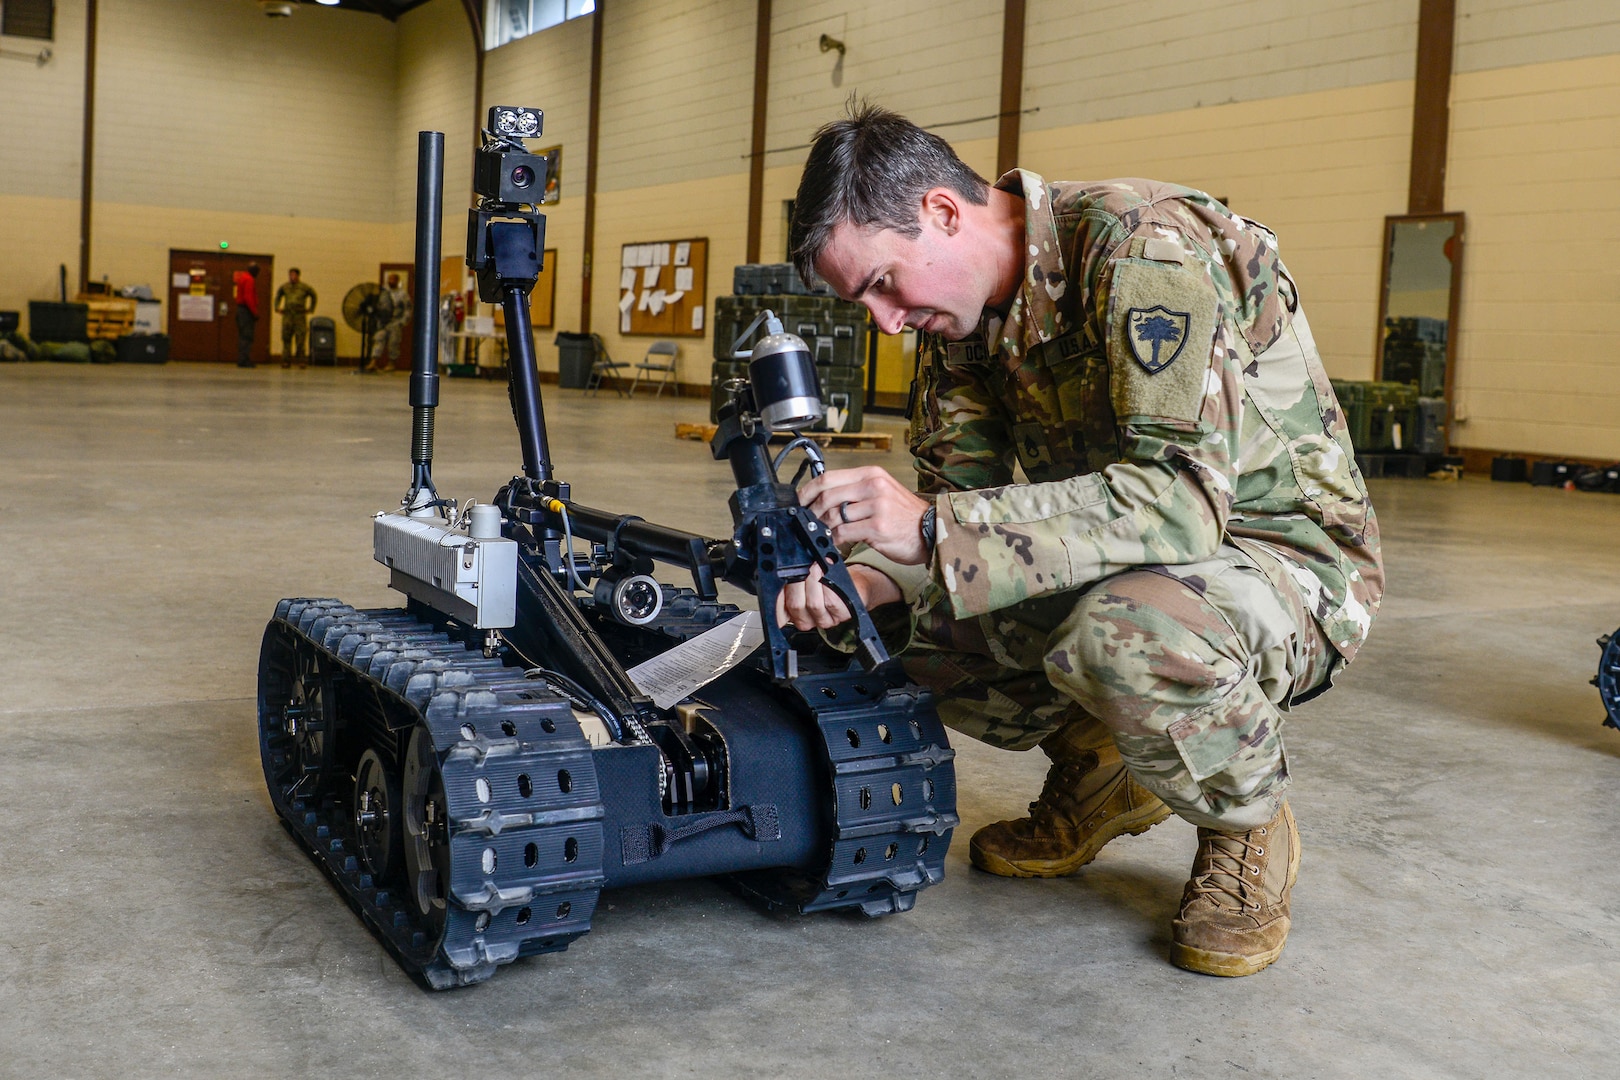 U.S. Army Staff Sgt. Kevin O’Conner, combat engineer with the 122nd Engineer Clearance Company, South Carolina National Guard, conducts route clearance training using the Talon IV Reset robotic vehicle at their Armory in Graniteville, S.C., Oct. 17, 2018, which is being fielded to the unit as they prepare for an upcoming deployment in 2019. The Soldiers practiced skills-sets to find, target and dispose of improvised explosive devices and ordnance to keep routes clear and safe for civilian and military traffic in a combat environment.